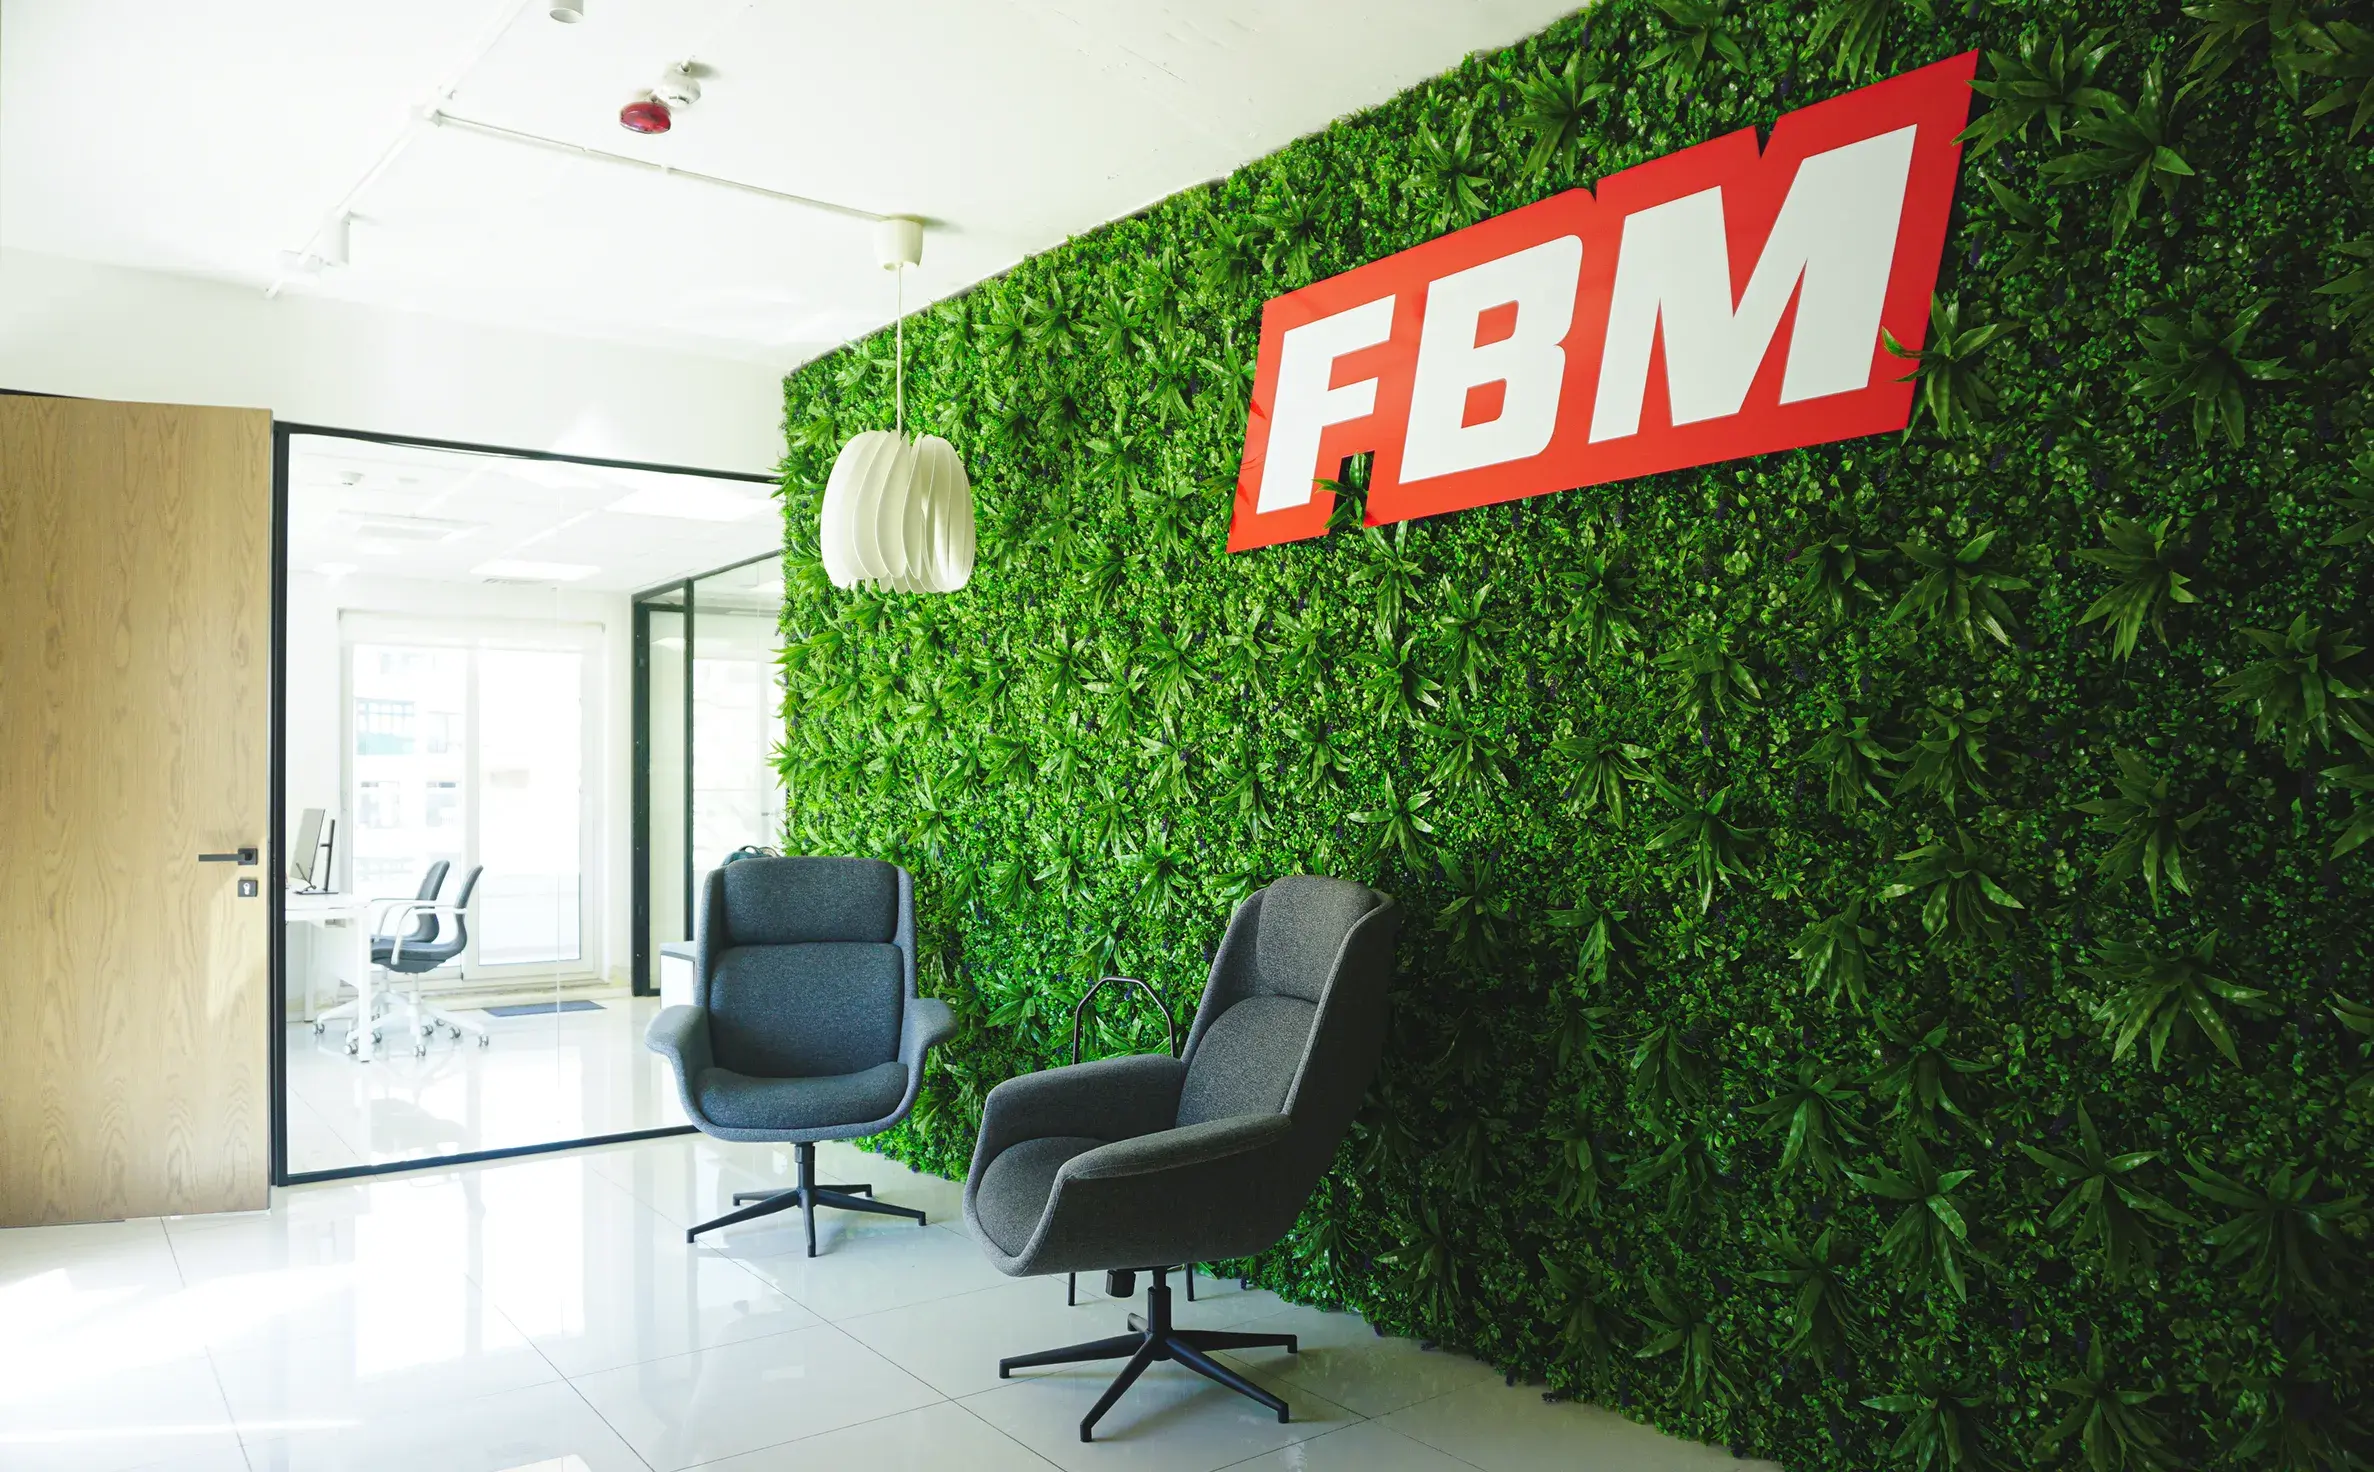 A social space in the FBM office with a green wall and the casino gaming brand above two chairs